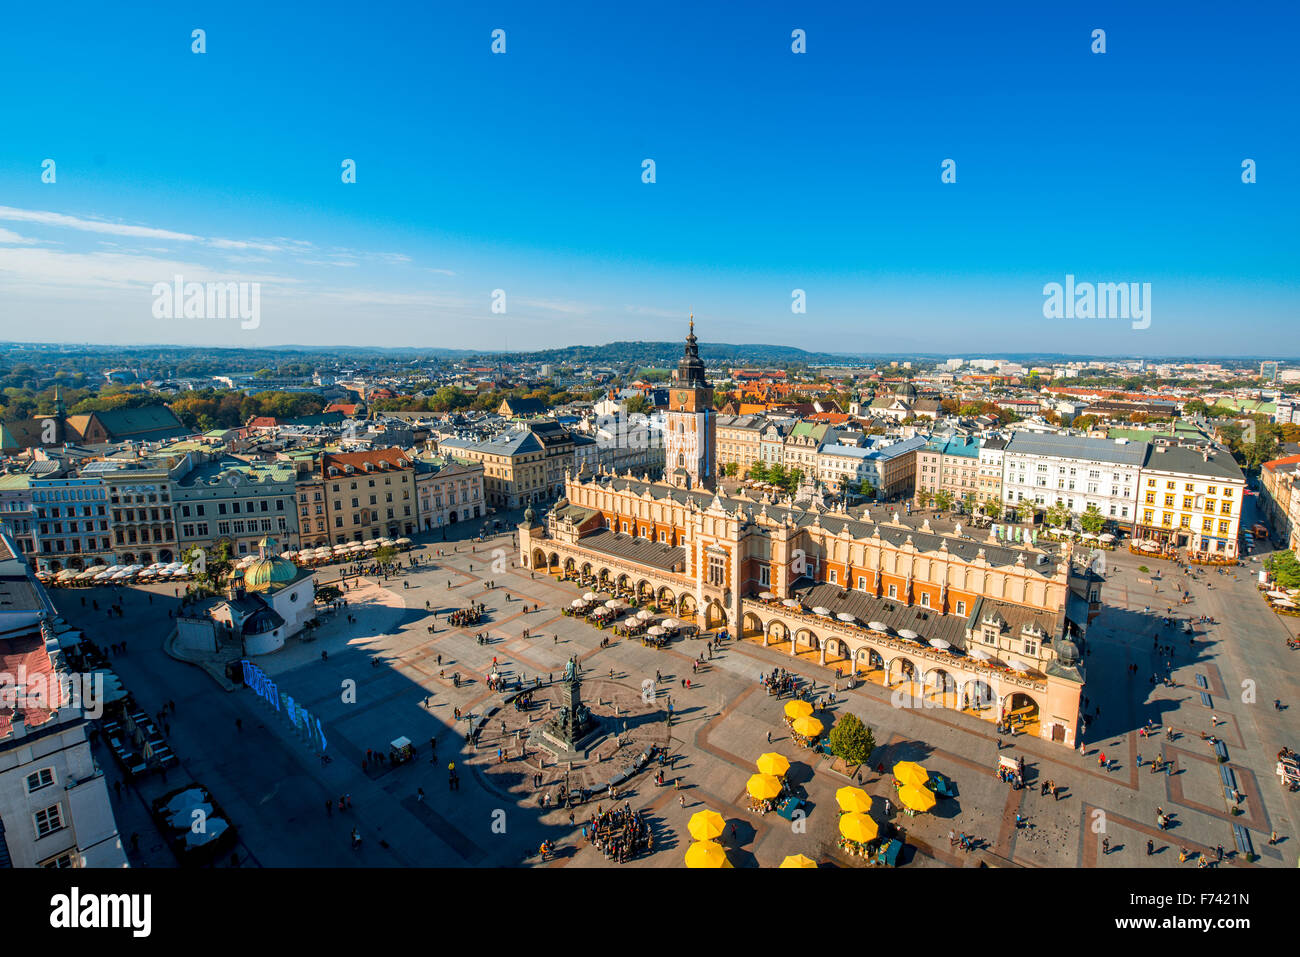 Aerial view on the main market square from St. Mary's basilica tower in Krakow Stock Photo